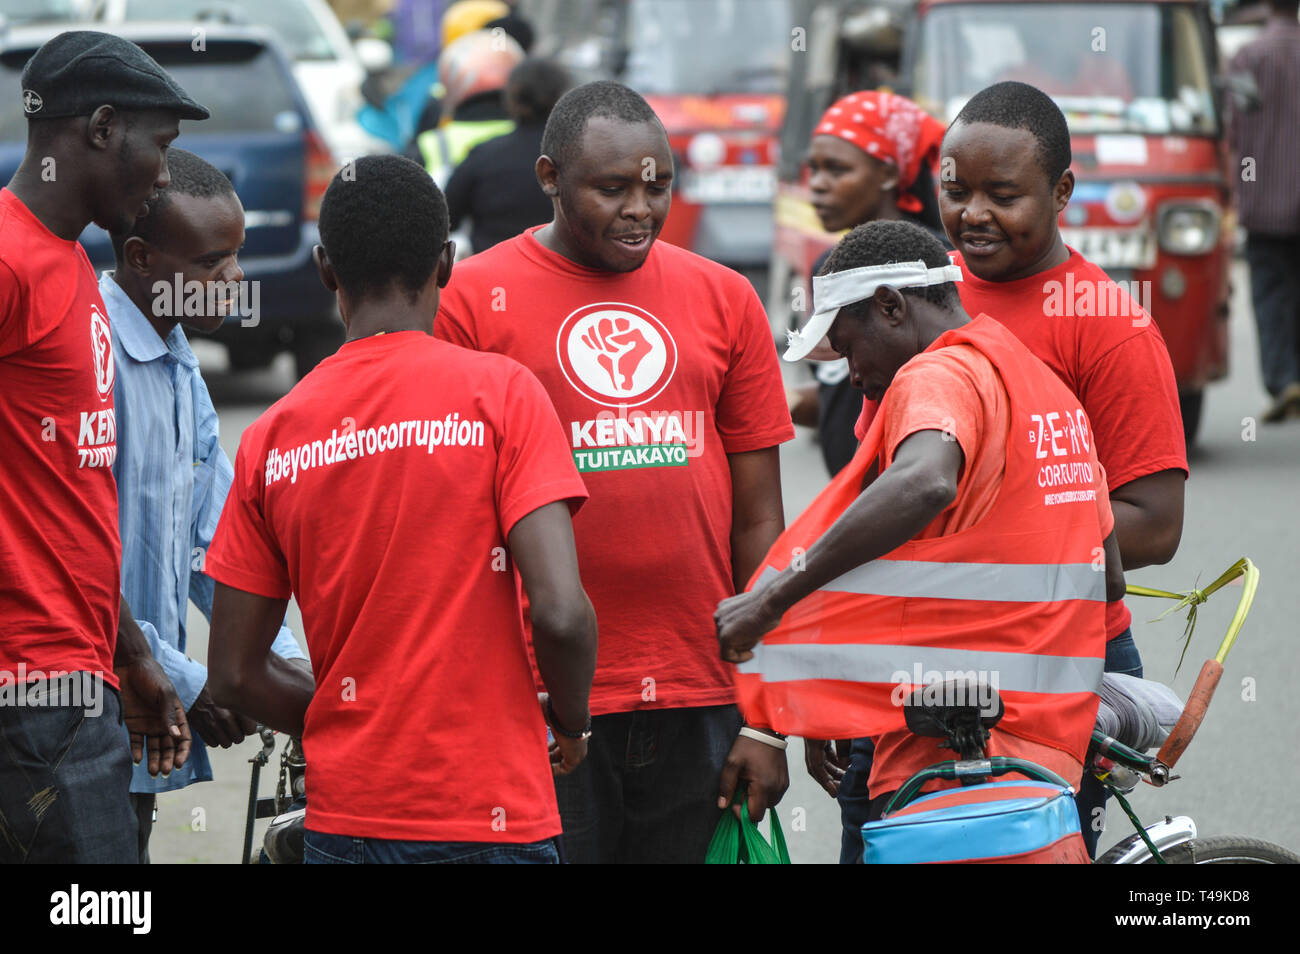 Nakuru, Rift Valley, Kenya. 14th Apr, 2019. A group of activists allied to Kenya's Red Vests Movement are seen engaging a member of the public in the streets of Nakuru during the anti-corruption protest.Activists allied to Kenya's Red Vests Movement were protesting silently about increased levels of corruption in the government, the activists are demanding action to be taken against all government officials involved in corruption. Credit: ZUMA Press, Inc./Alamy Live News Stock Photo